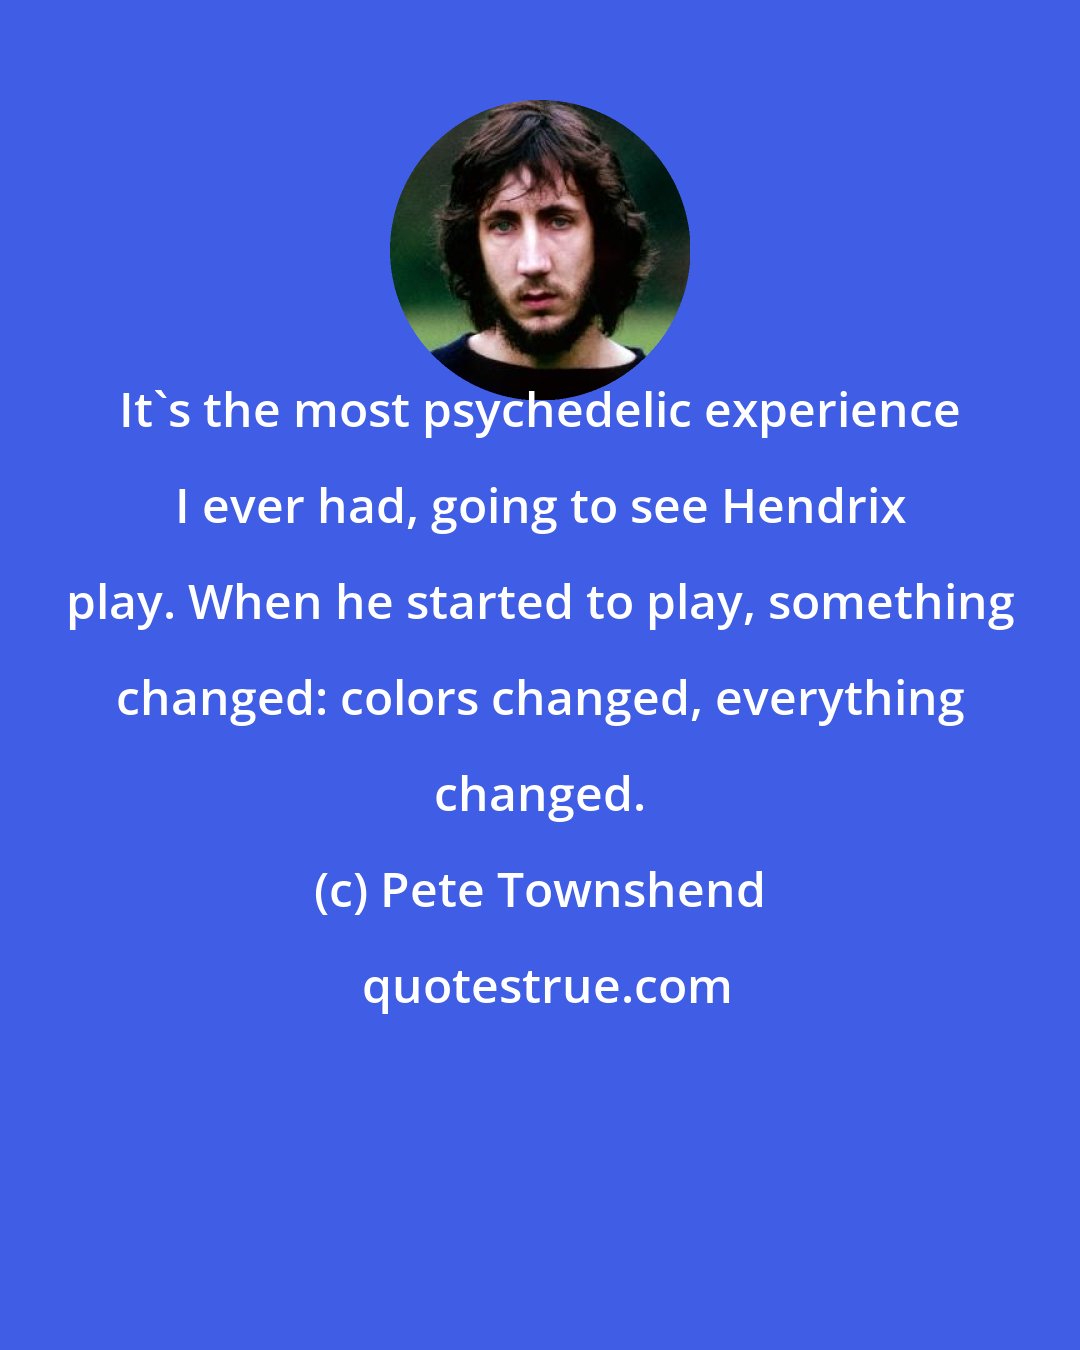 Pete Townshend: It's the most psychedelic experience I ever had, going to see Hendrix play. When he started to play, something changed: colors changed, everything changed.